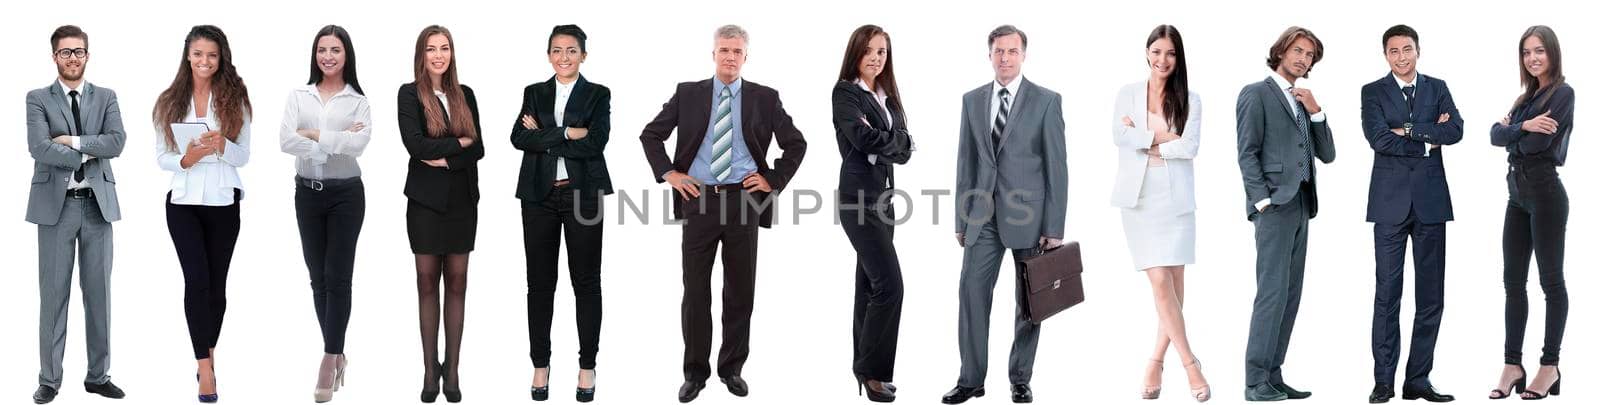 group of successful business people isolated on white by asdf